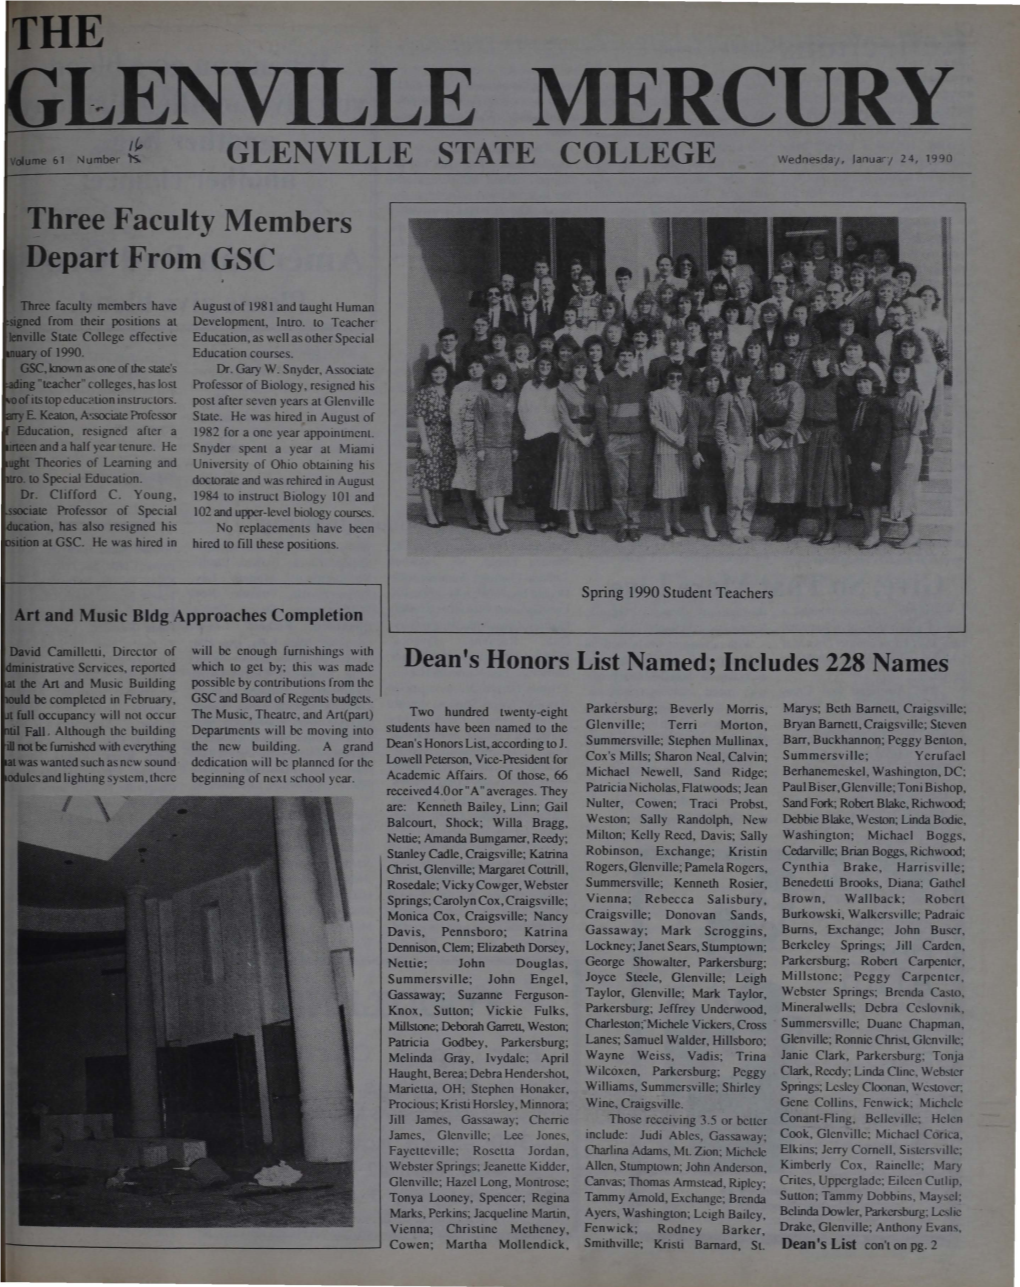 LENVILLE MERCURY If, Volume 61 Number 'Is GLENVILLE STATE COLLEGE Wednesda/, /Anuar'; 24, 1990